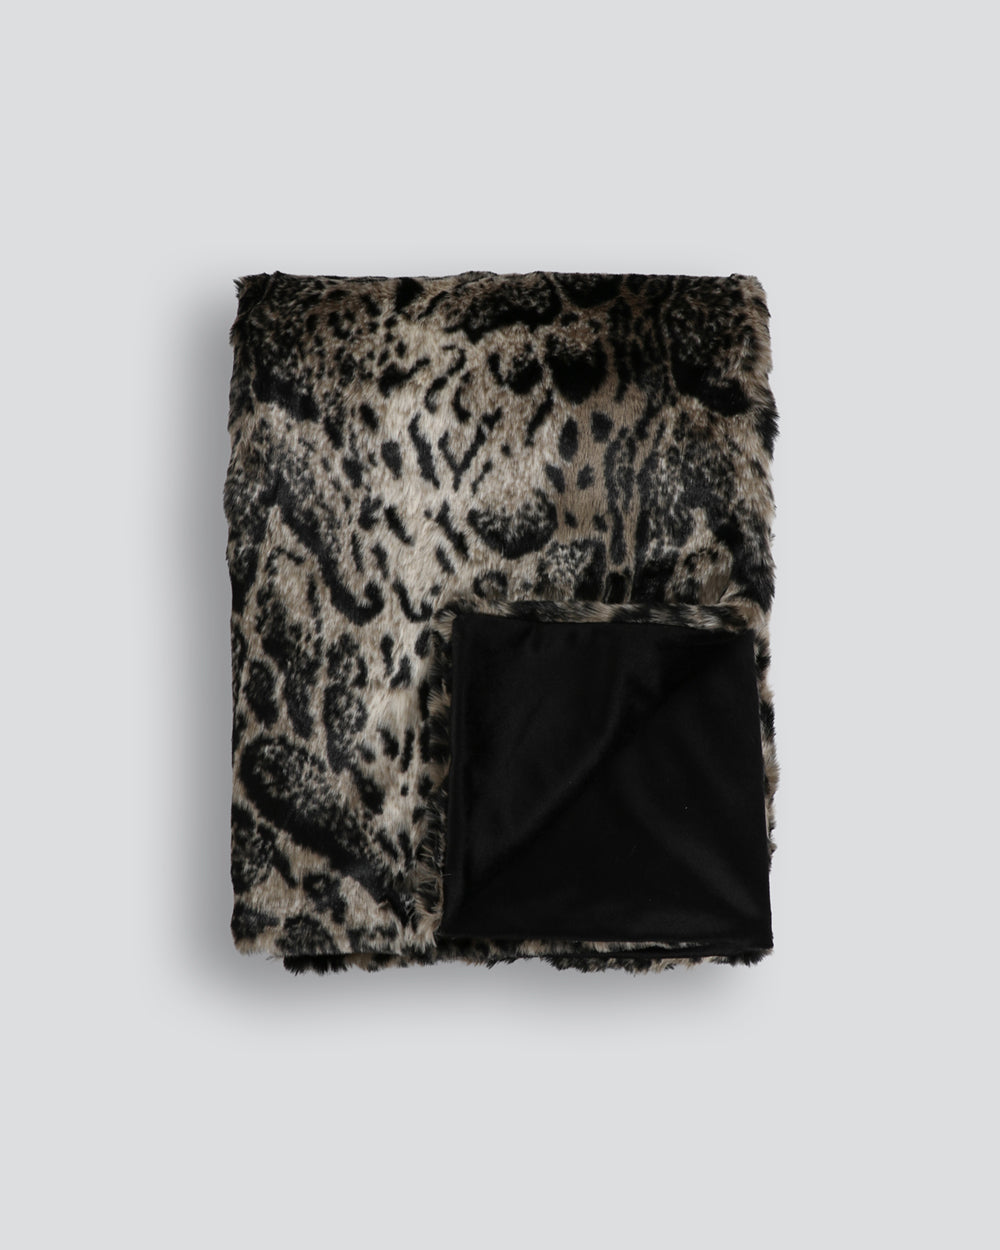 Heirloom African Leopard Throw Rug Blanket in Faux Fur is available from Make Your House A Home Premium Stockist. Furniture Store Bendigo, Victoria. Australia Wide Delivery.